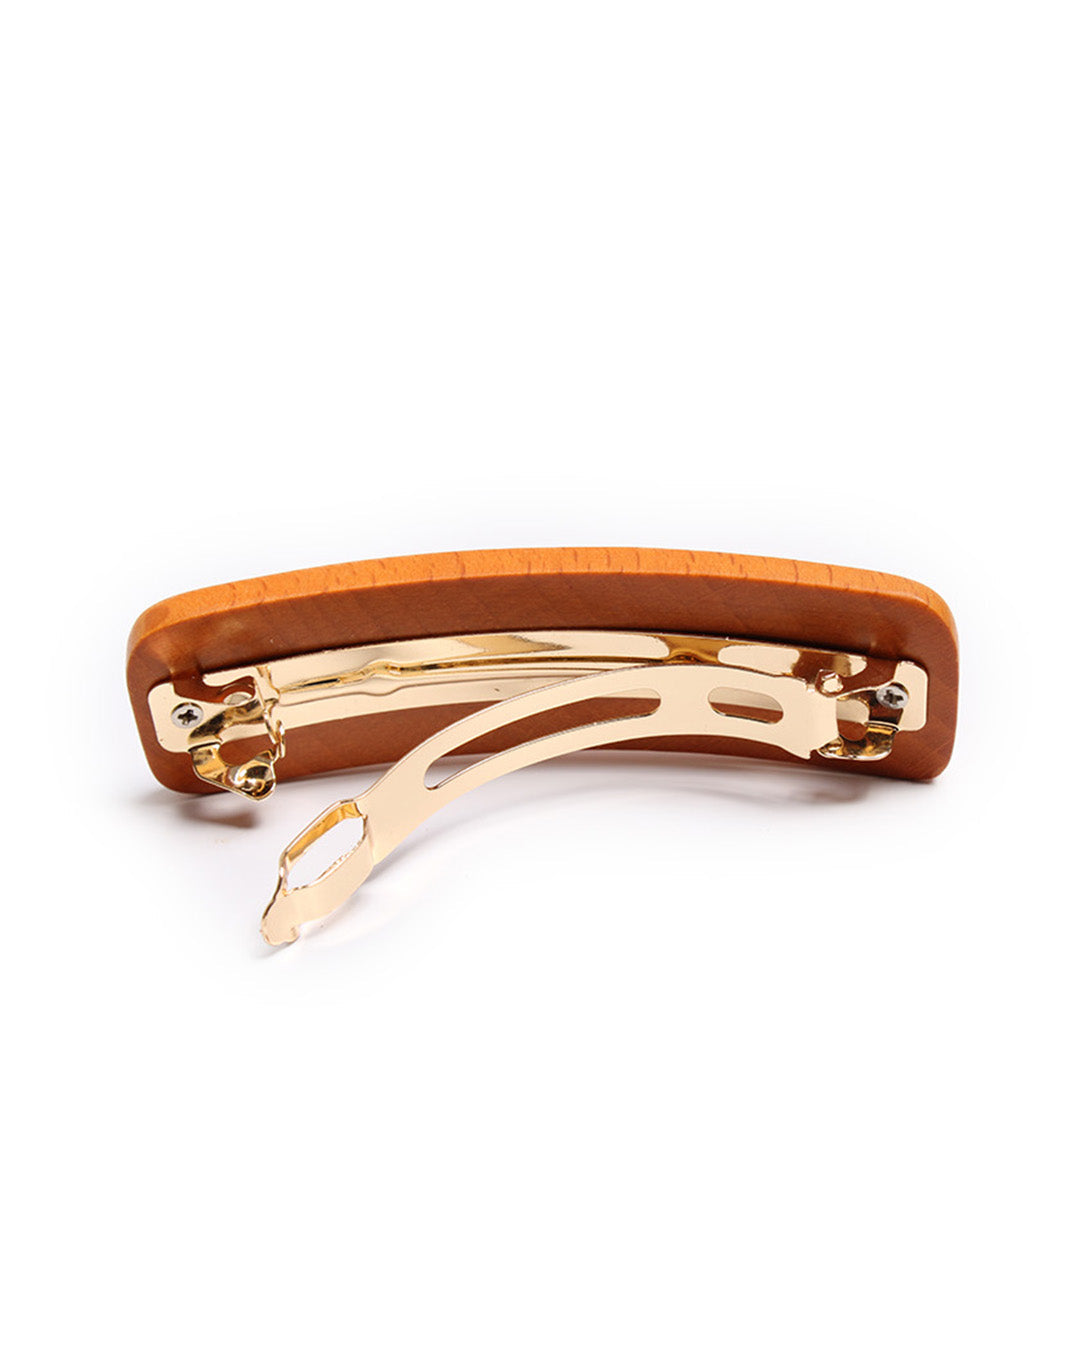 Beech Wood French Barrettes (3 pack)